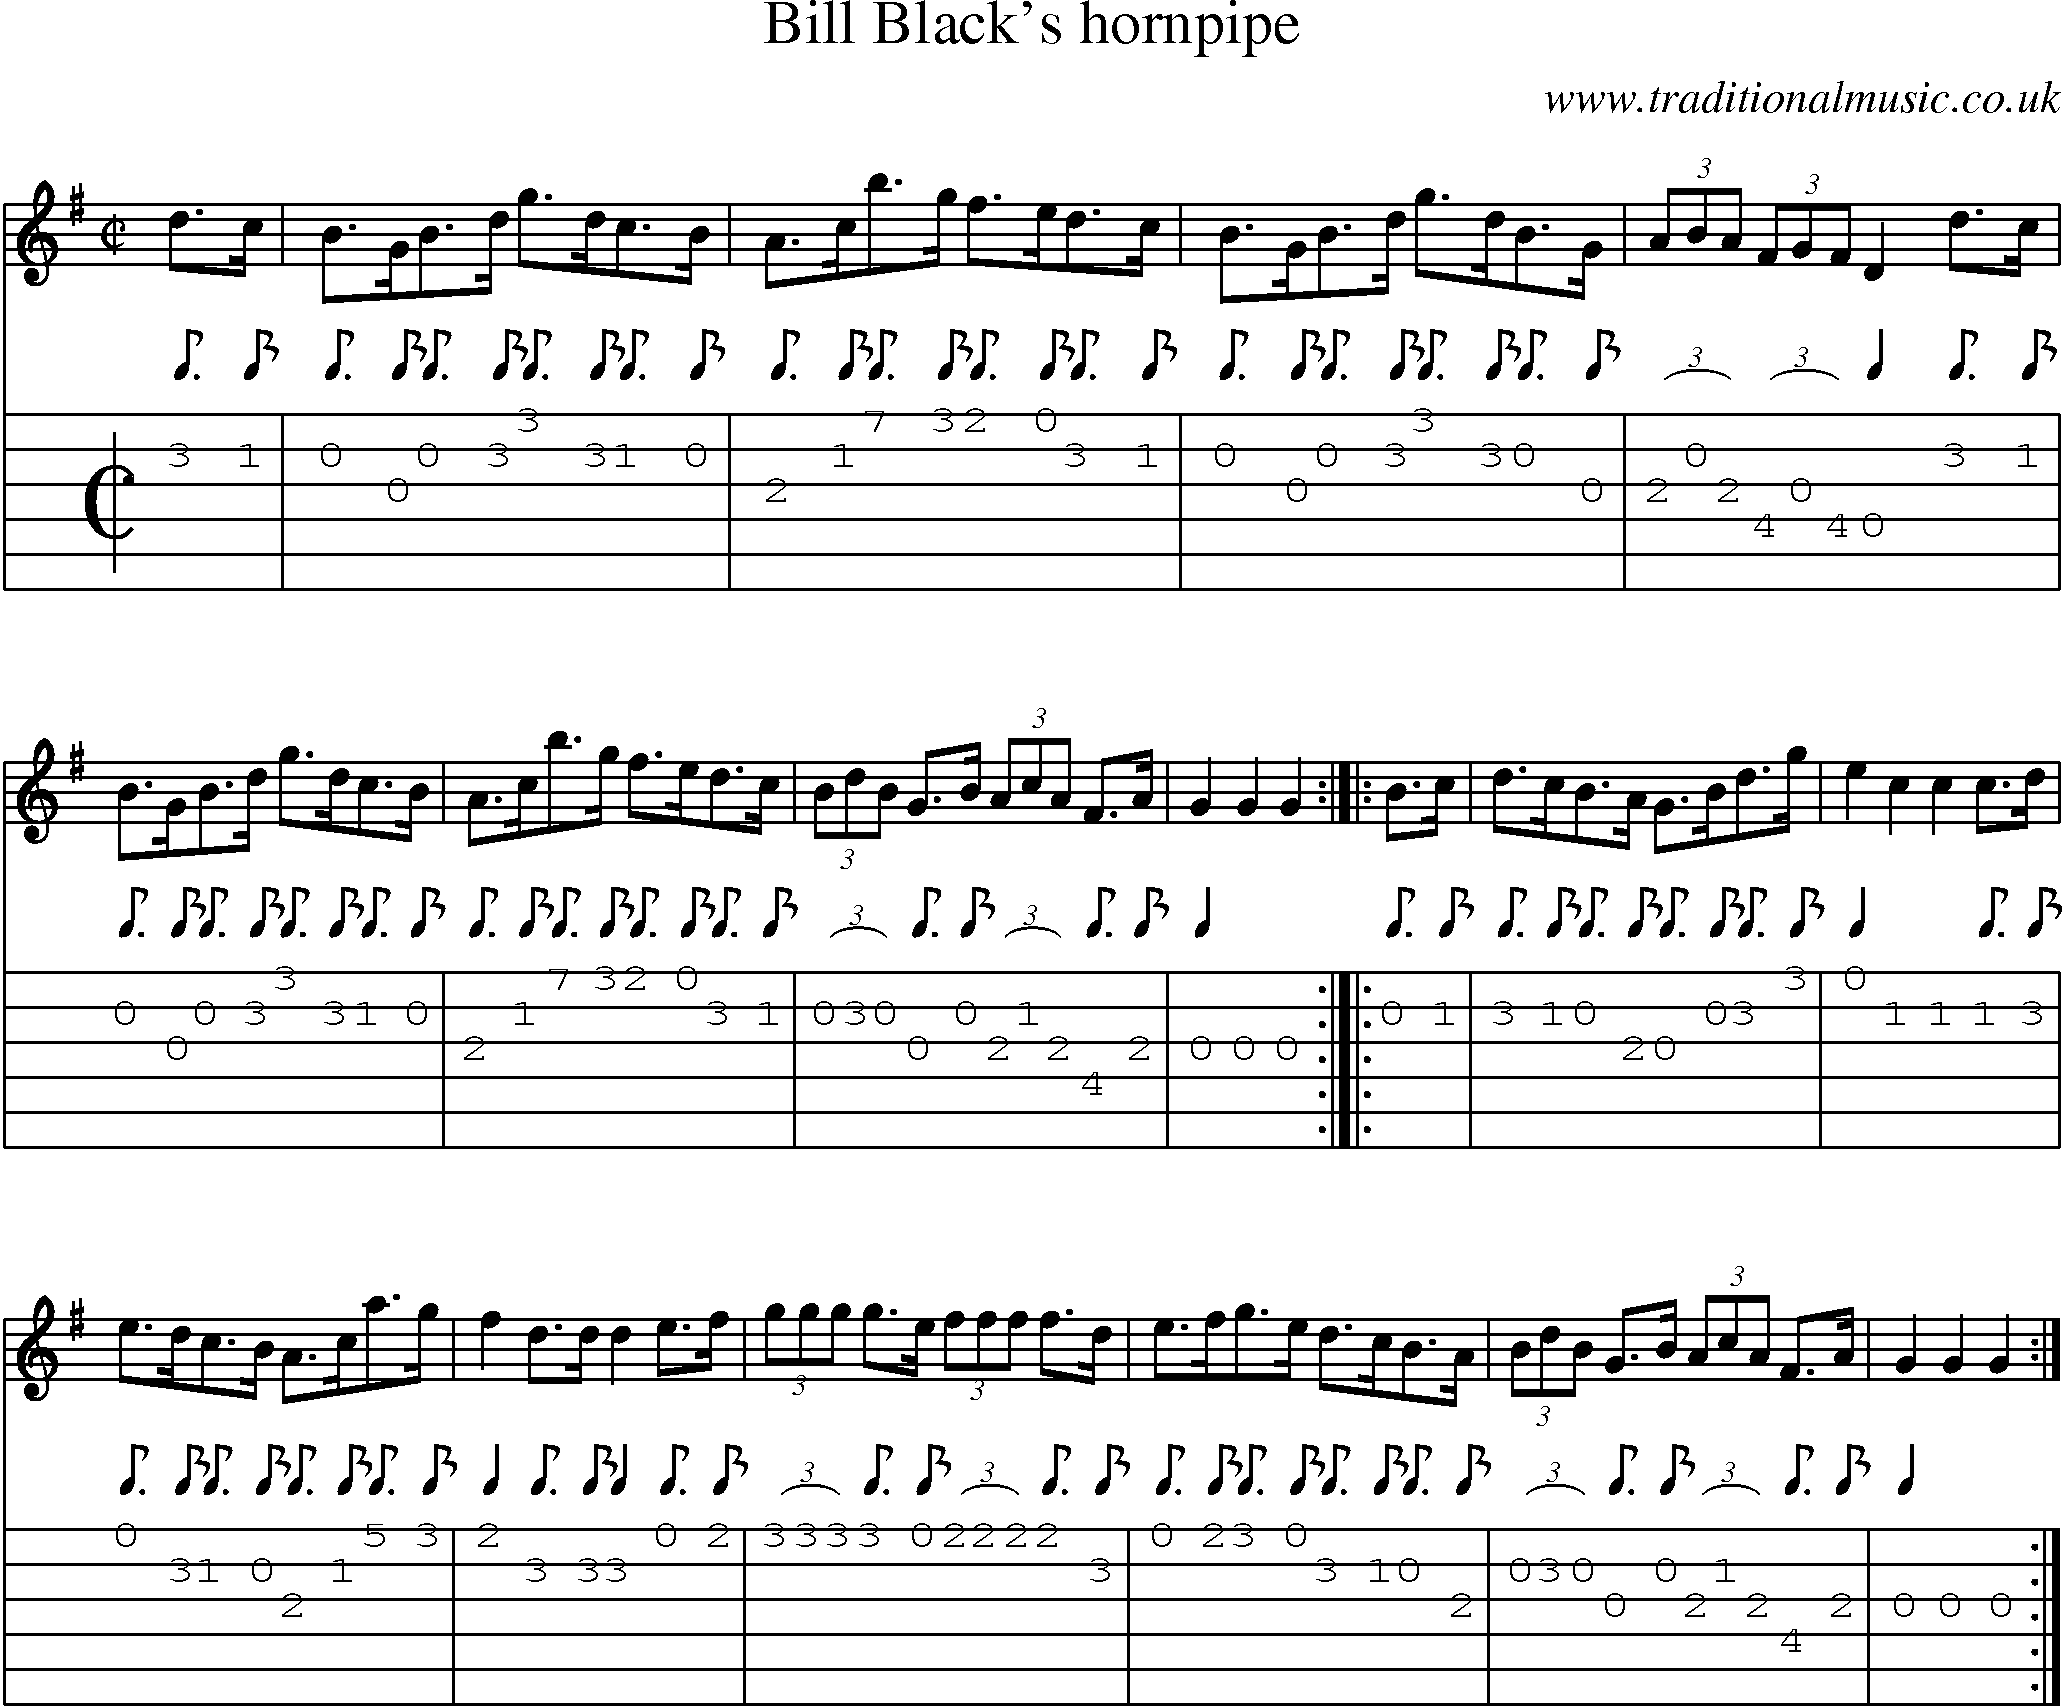 Music Score and Guitar Tabs for Bill Blacks Hornpipe